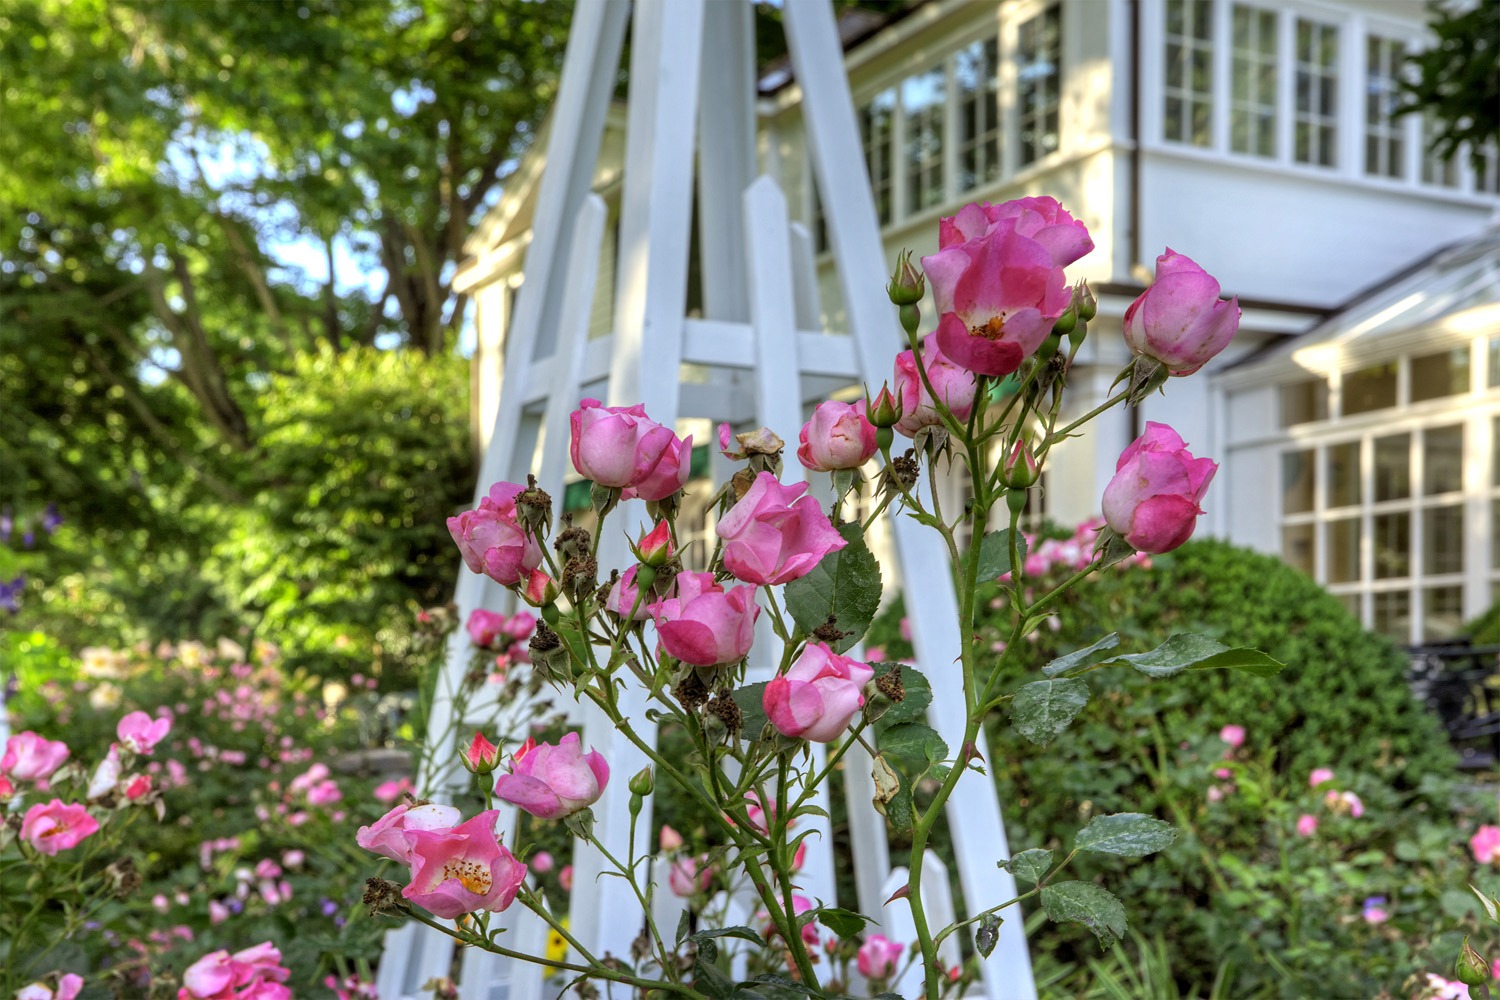 A lush garden with pink roses in the foreground, a white wooden trellis, and a house with large windows surrounded by dense green foliage.